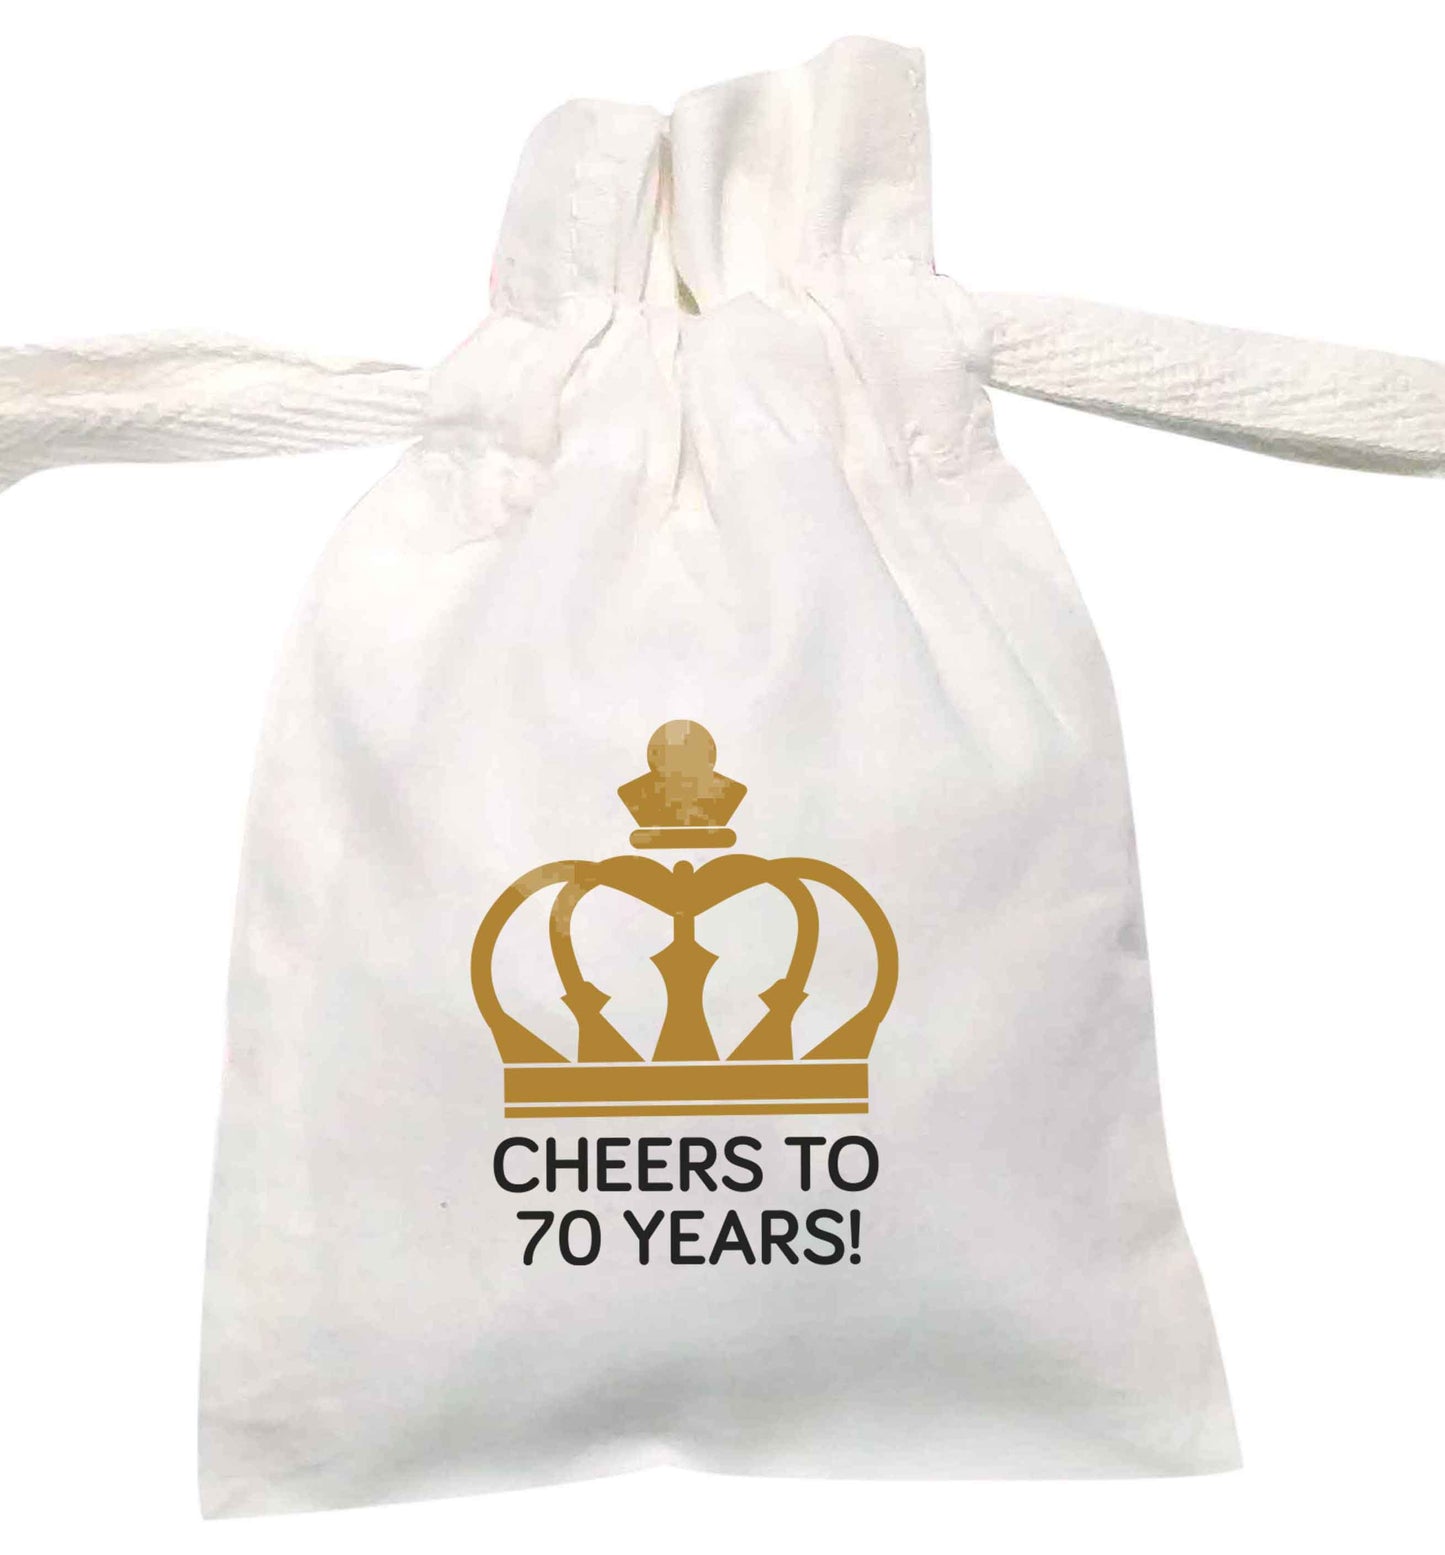 Cheers to 70 years! | XS - L | Pouch / Drawstring bag / Sack | Organic Cotton | Bulk discounts available!